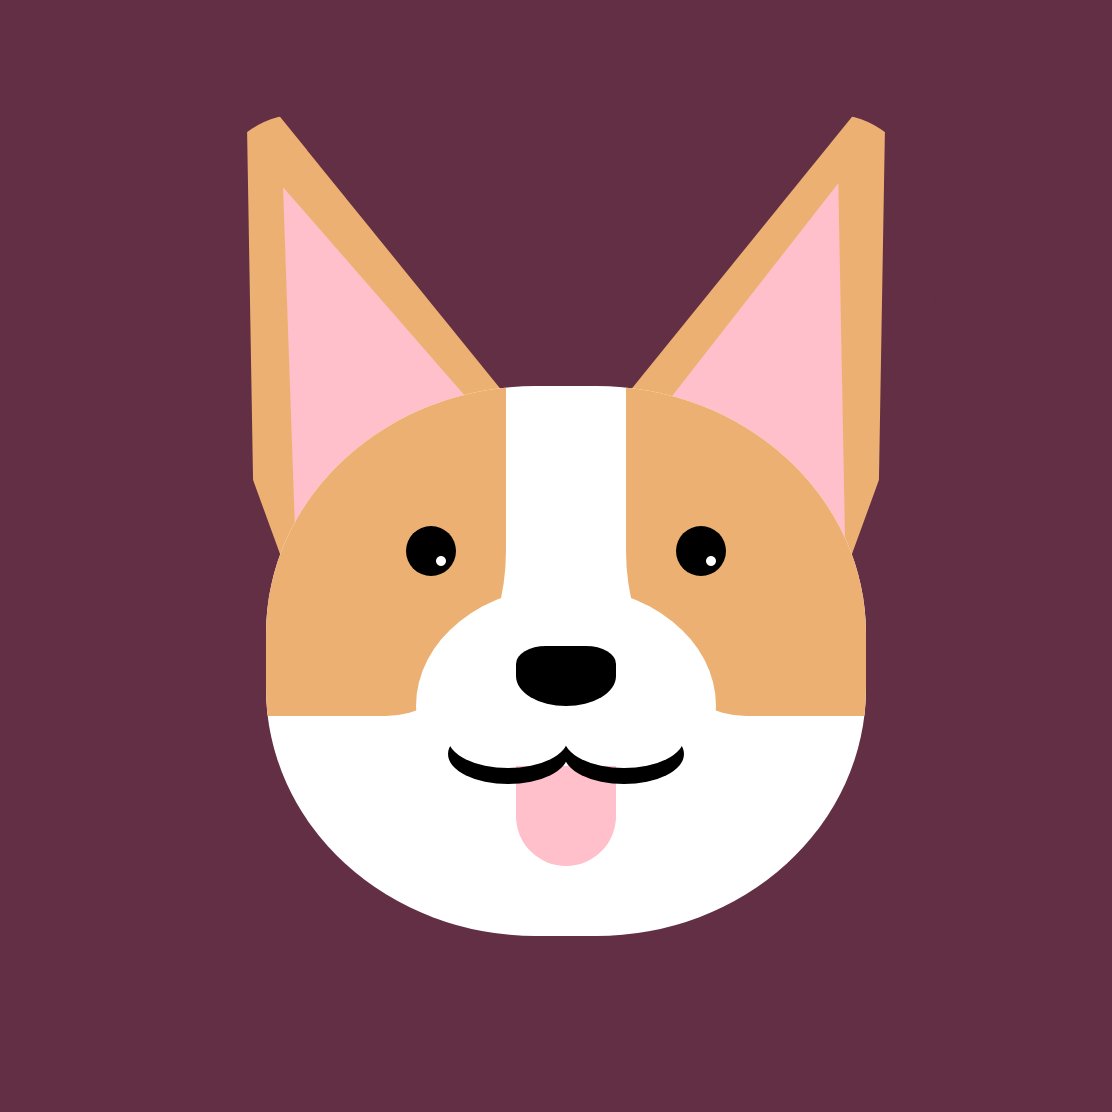 Day 2 is a corgi pupper Had some challenges with this one trying to get triangular ears without pointy tops - harder than I thought! Figuring out that you can use masking techniques in CSS to do these kind of things. CodePen is  https://codepen.io/aitchiss/full/zYvmWrp  #100DaysProjectScotland